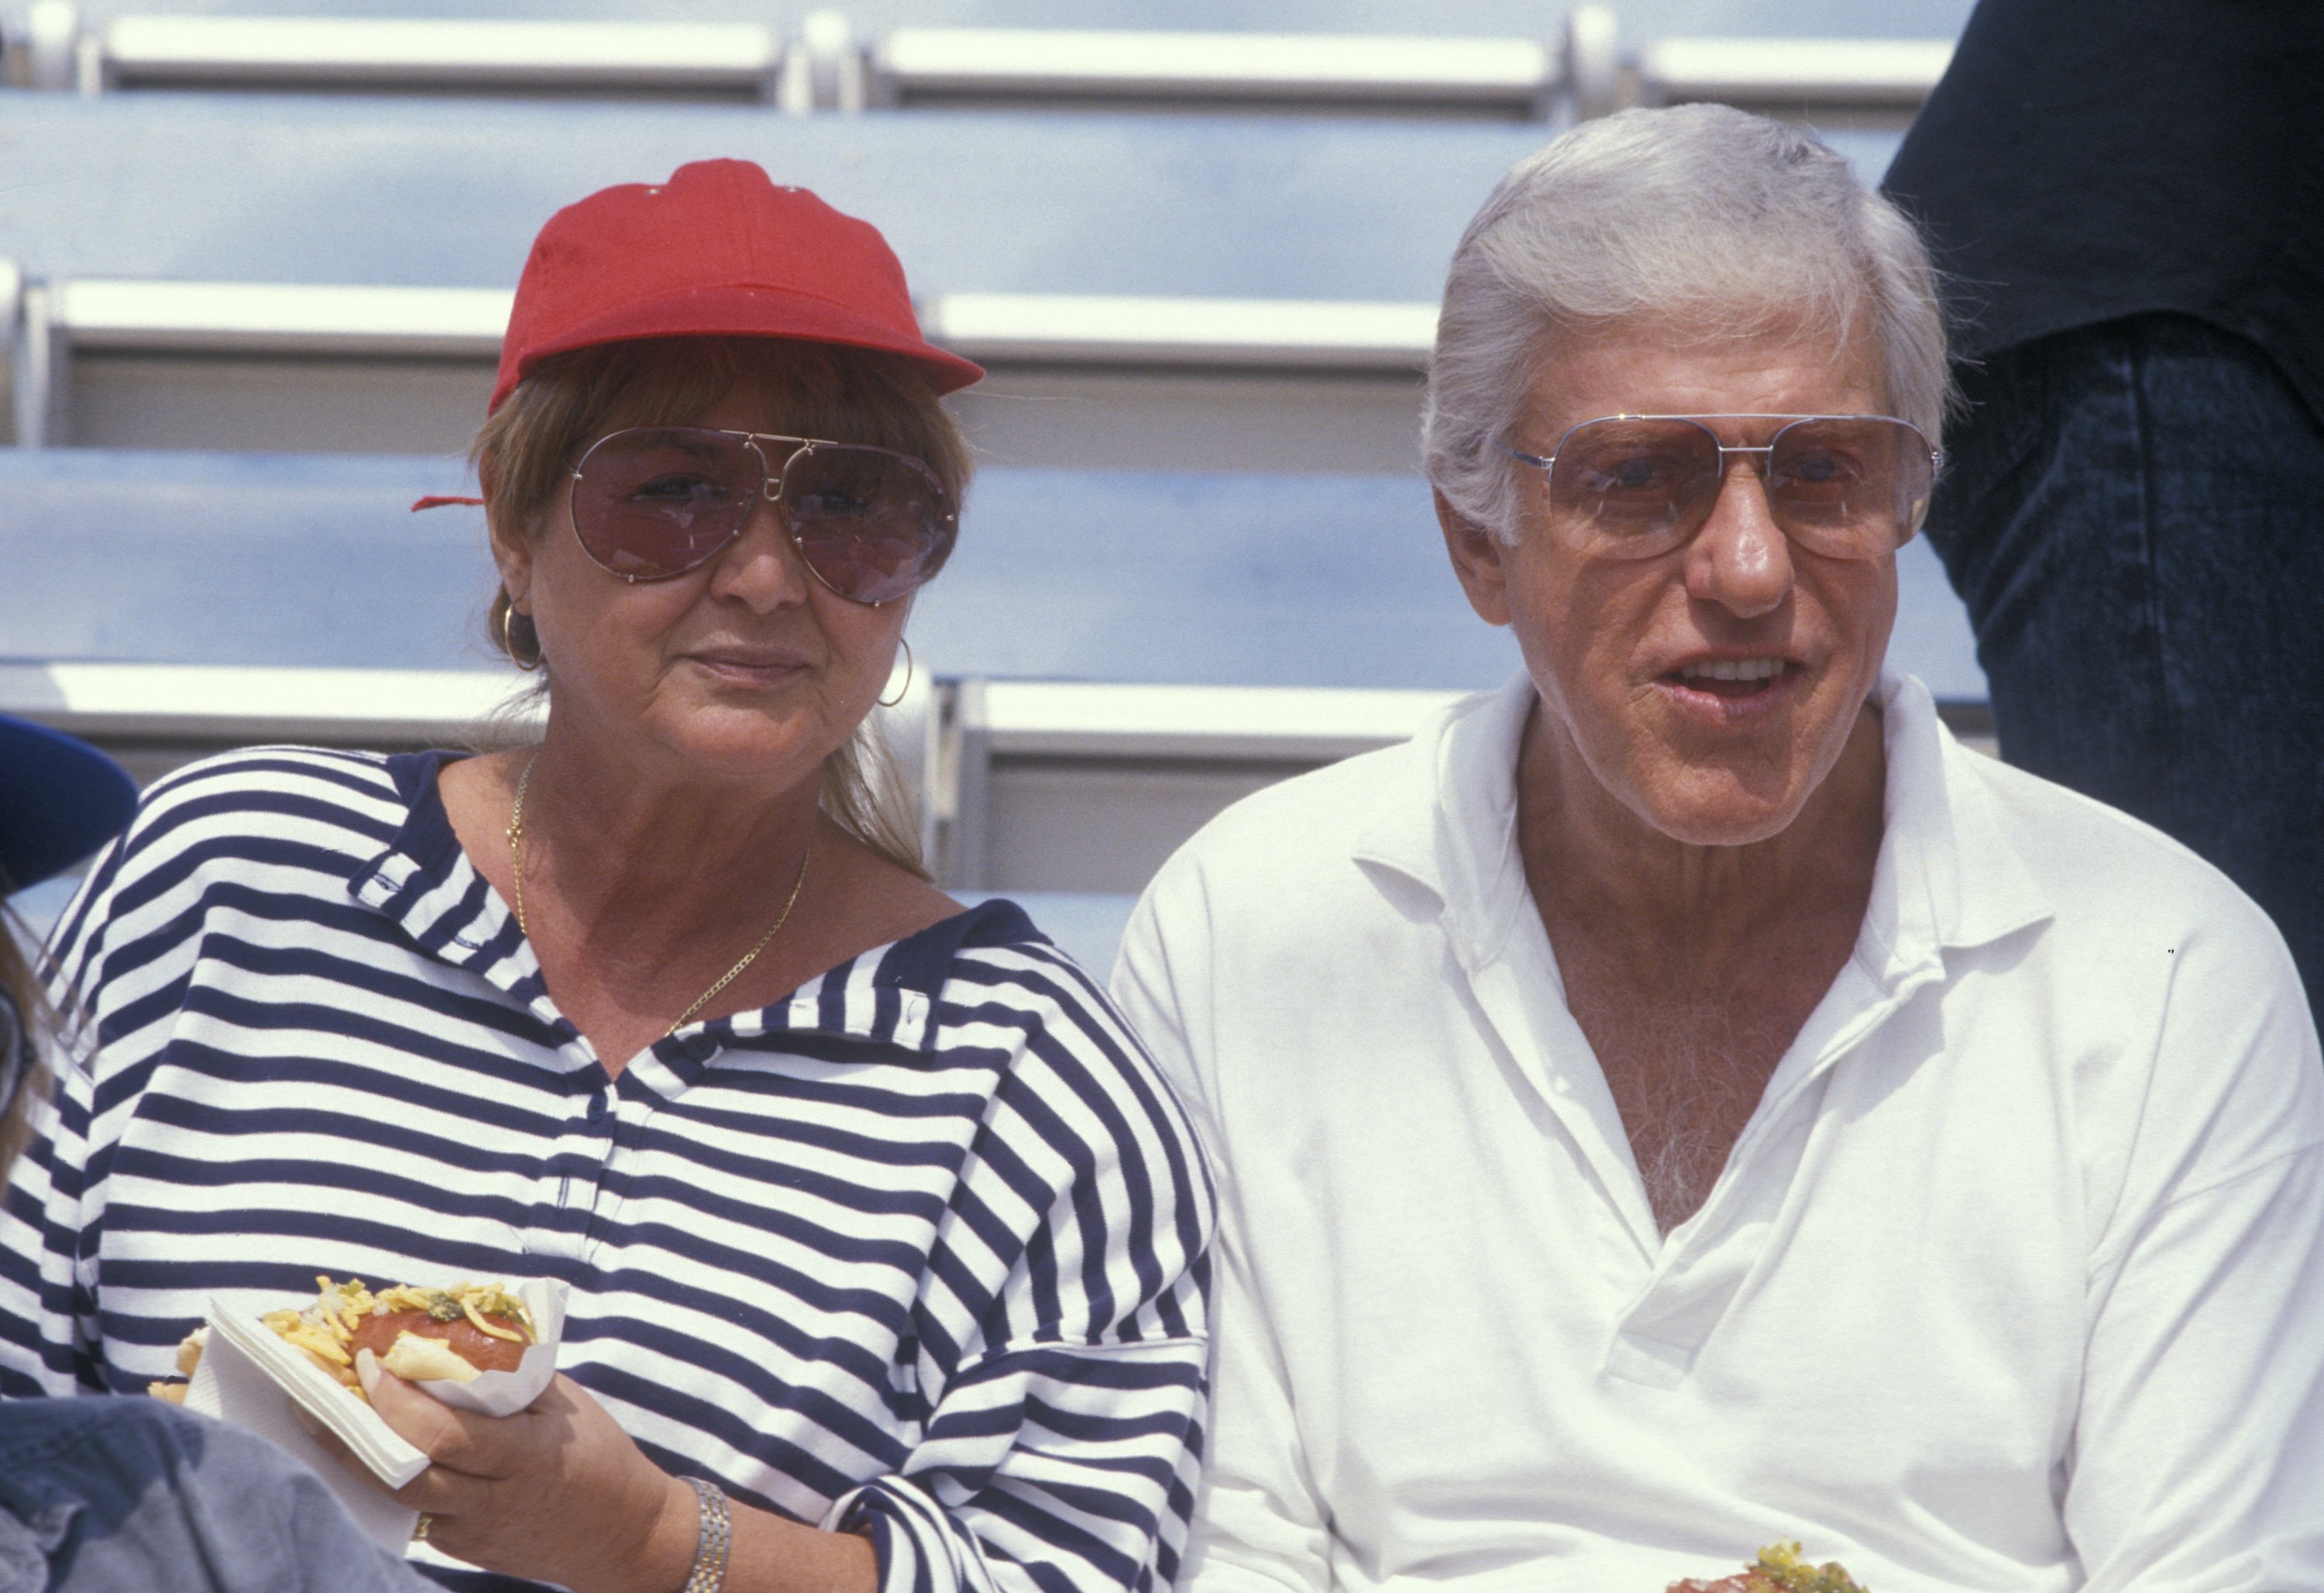 Michelle Triola and Dick Van Dyke during 1st Softball Game to Benefit Neighborhood Youth at Pepperdine University at Pepperdine University in Malibu, California | Source: Getty Images